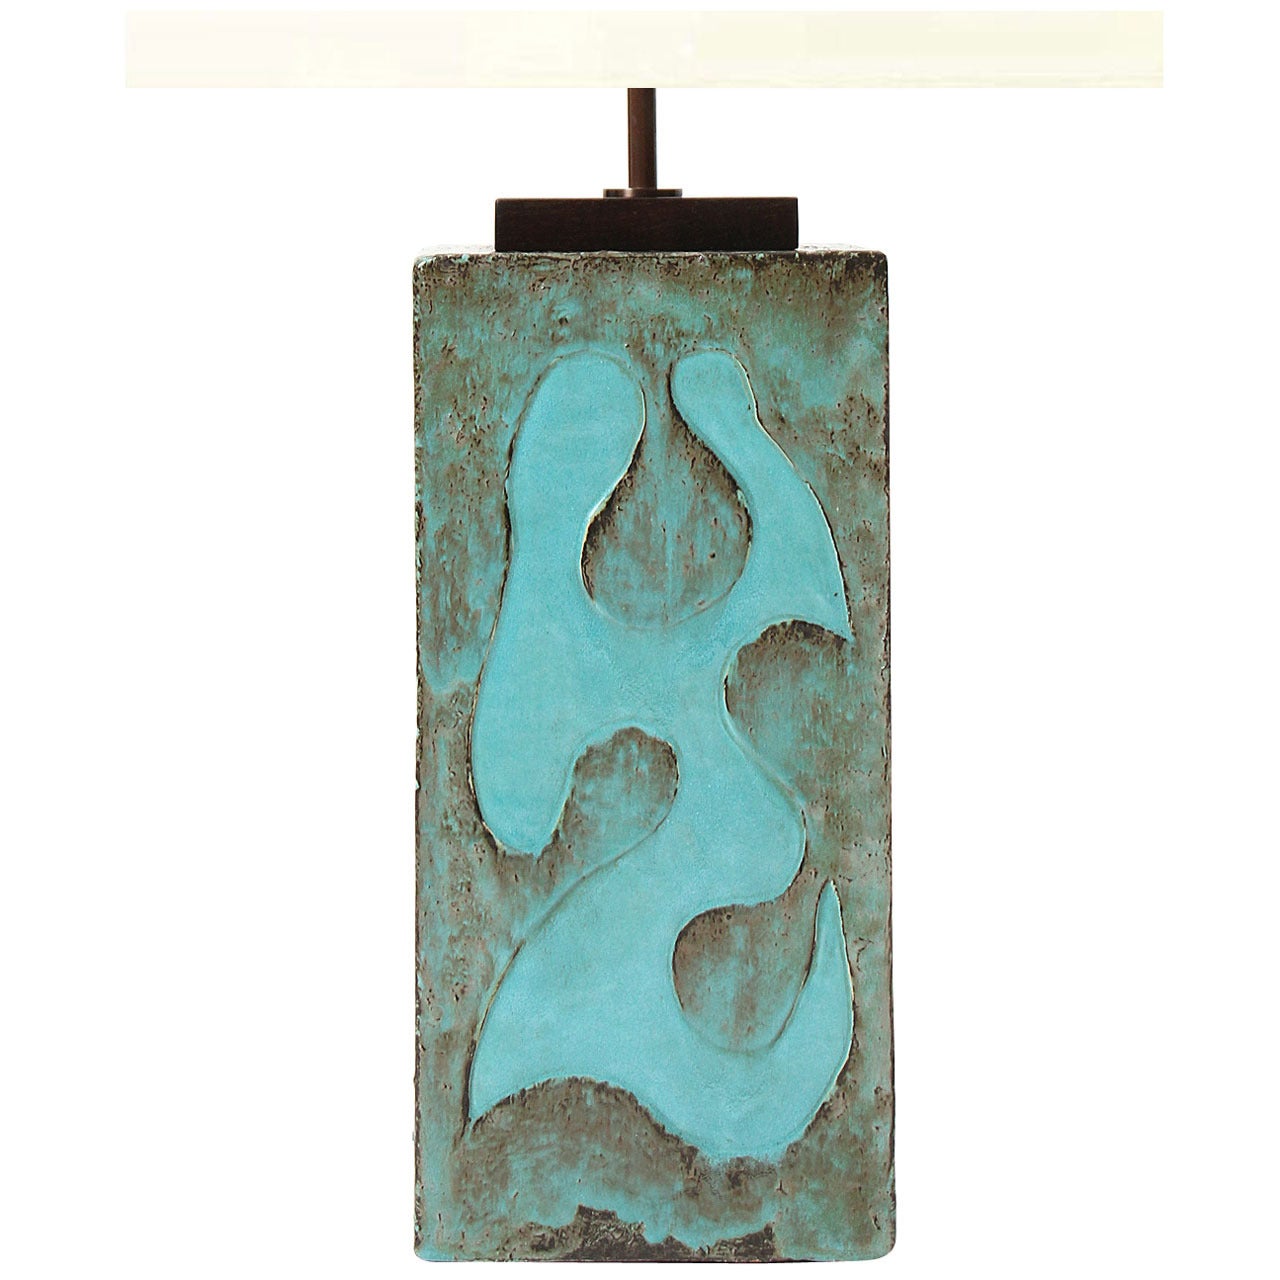 Relief Sculpture Table Lamp